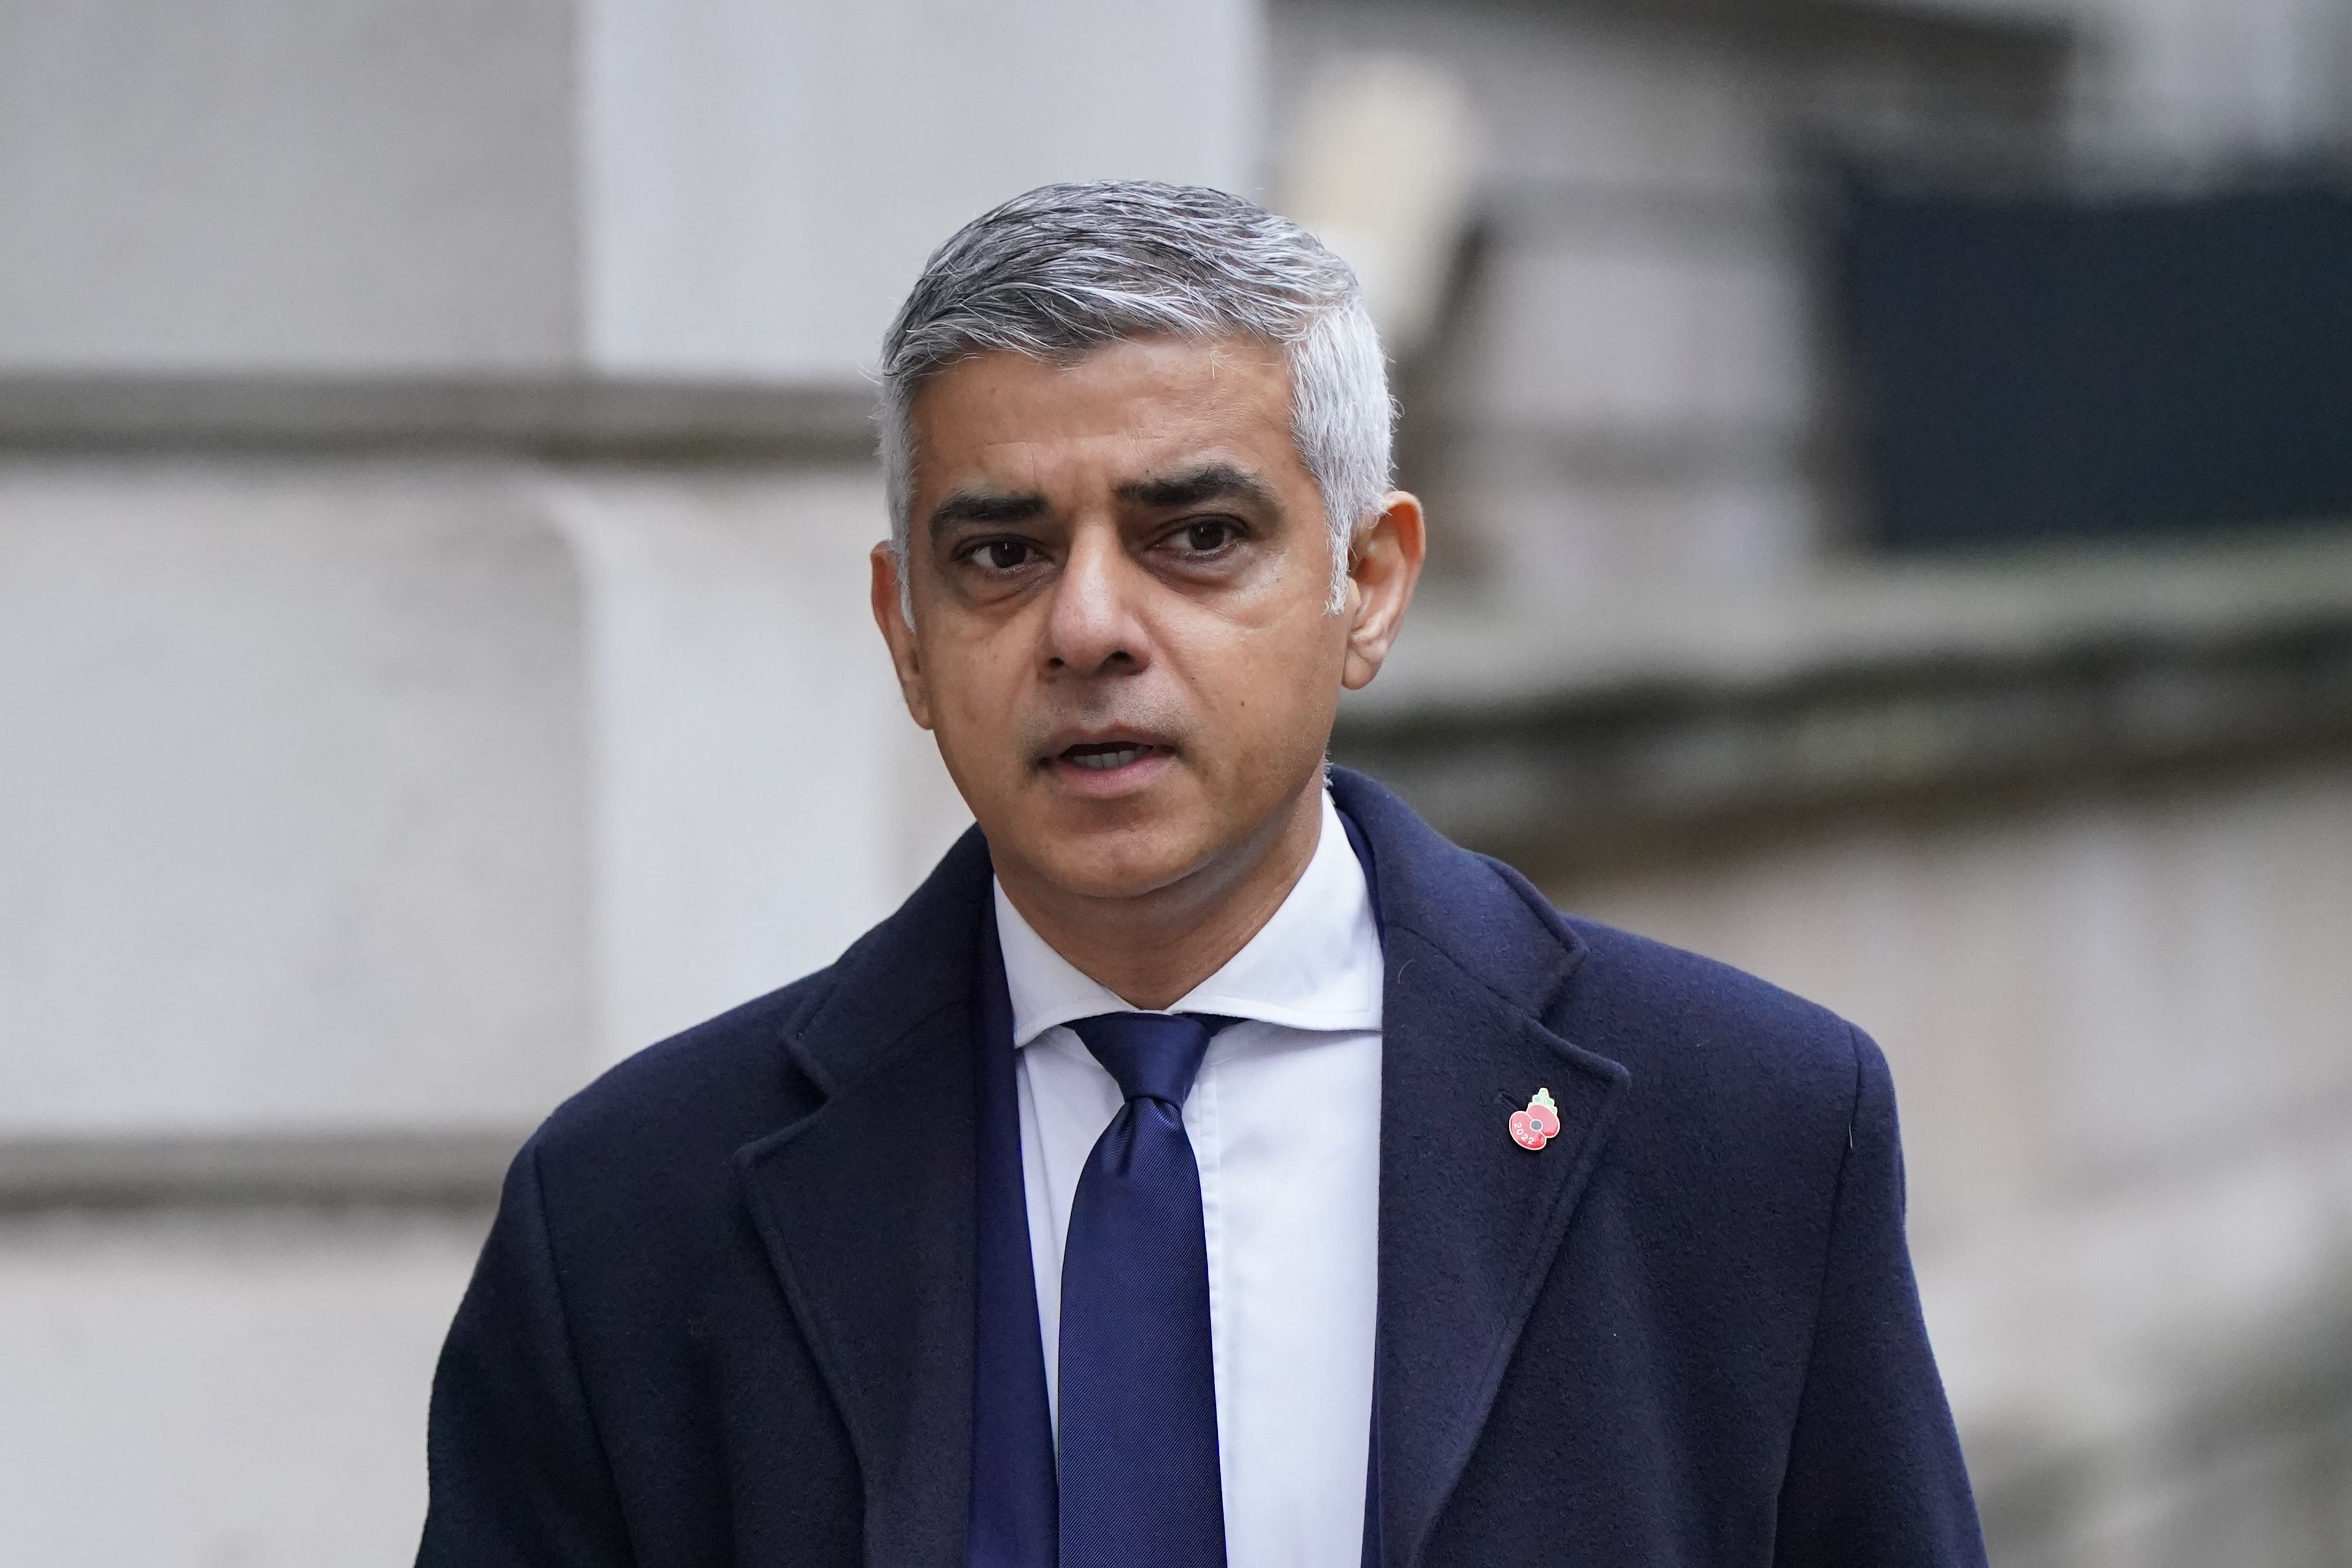 Mayor of London Sadiq Khan and chief medical officer Sir Chris Whitty will join public health leaders on Tuesday to discuss how they can work together to tackle air pollution (Jonathan Brady/PA)